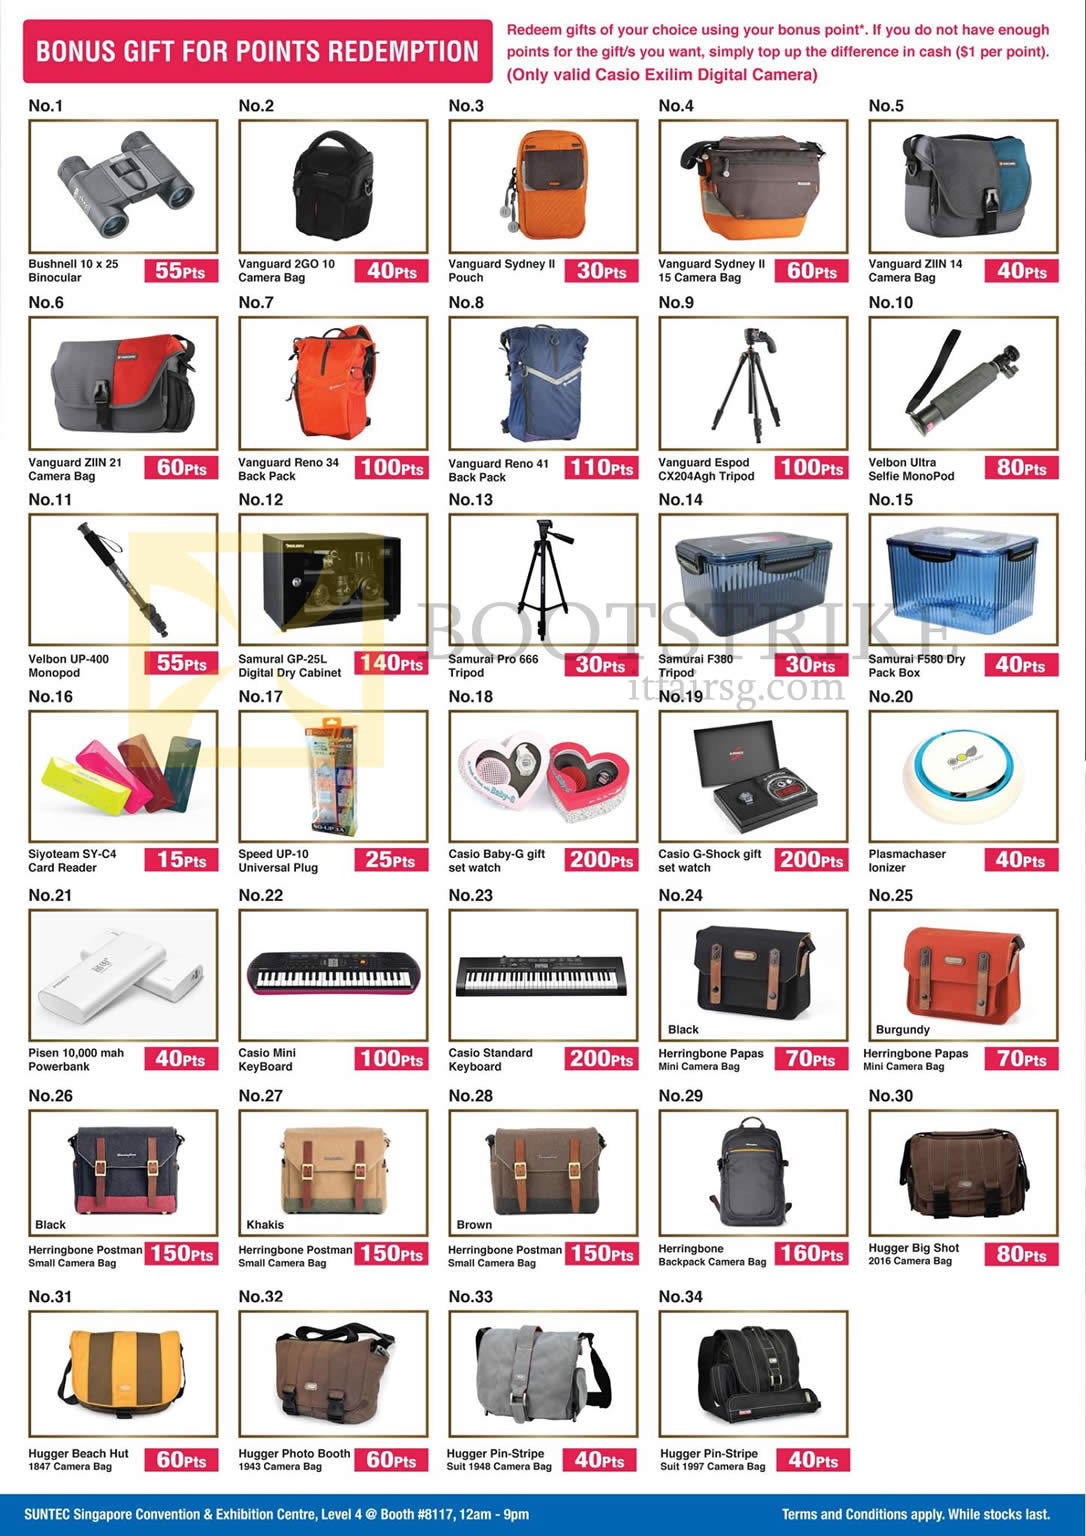 IT SHOW 2015 price list image brochure of Casio Digital Cameras Gift For Points Redemption